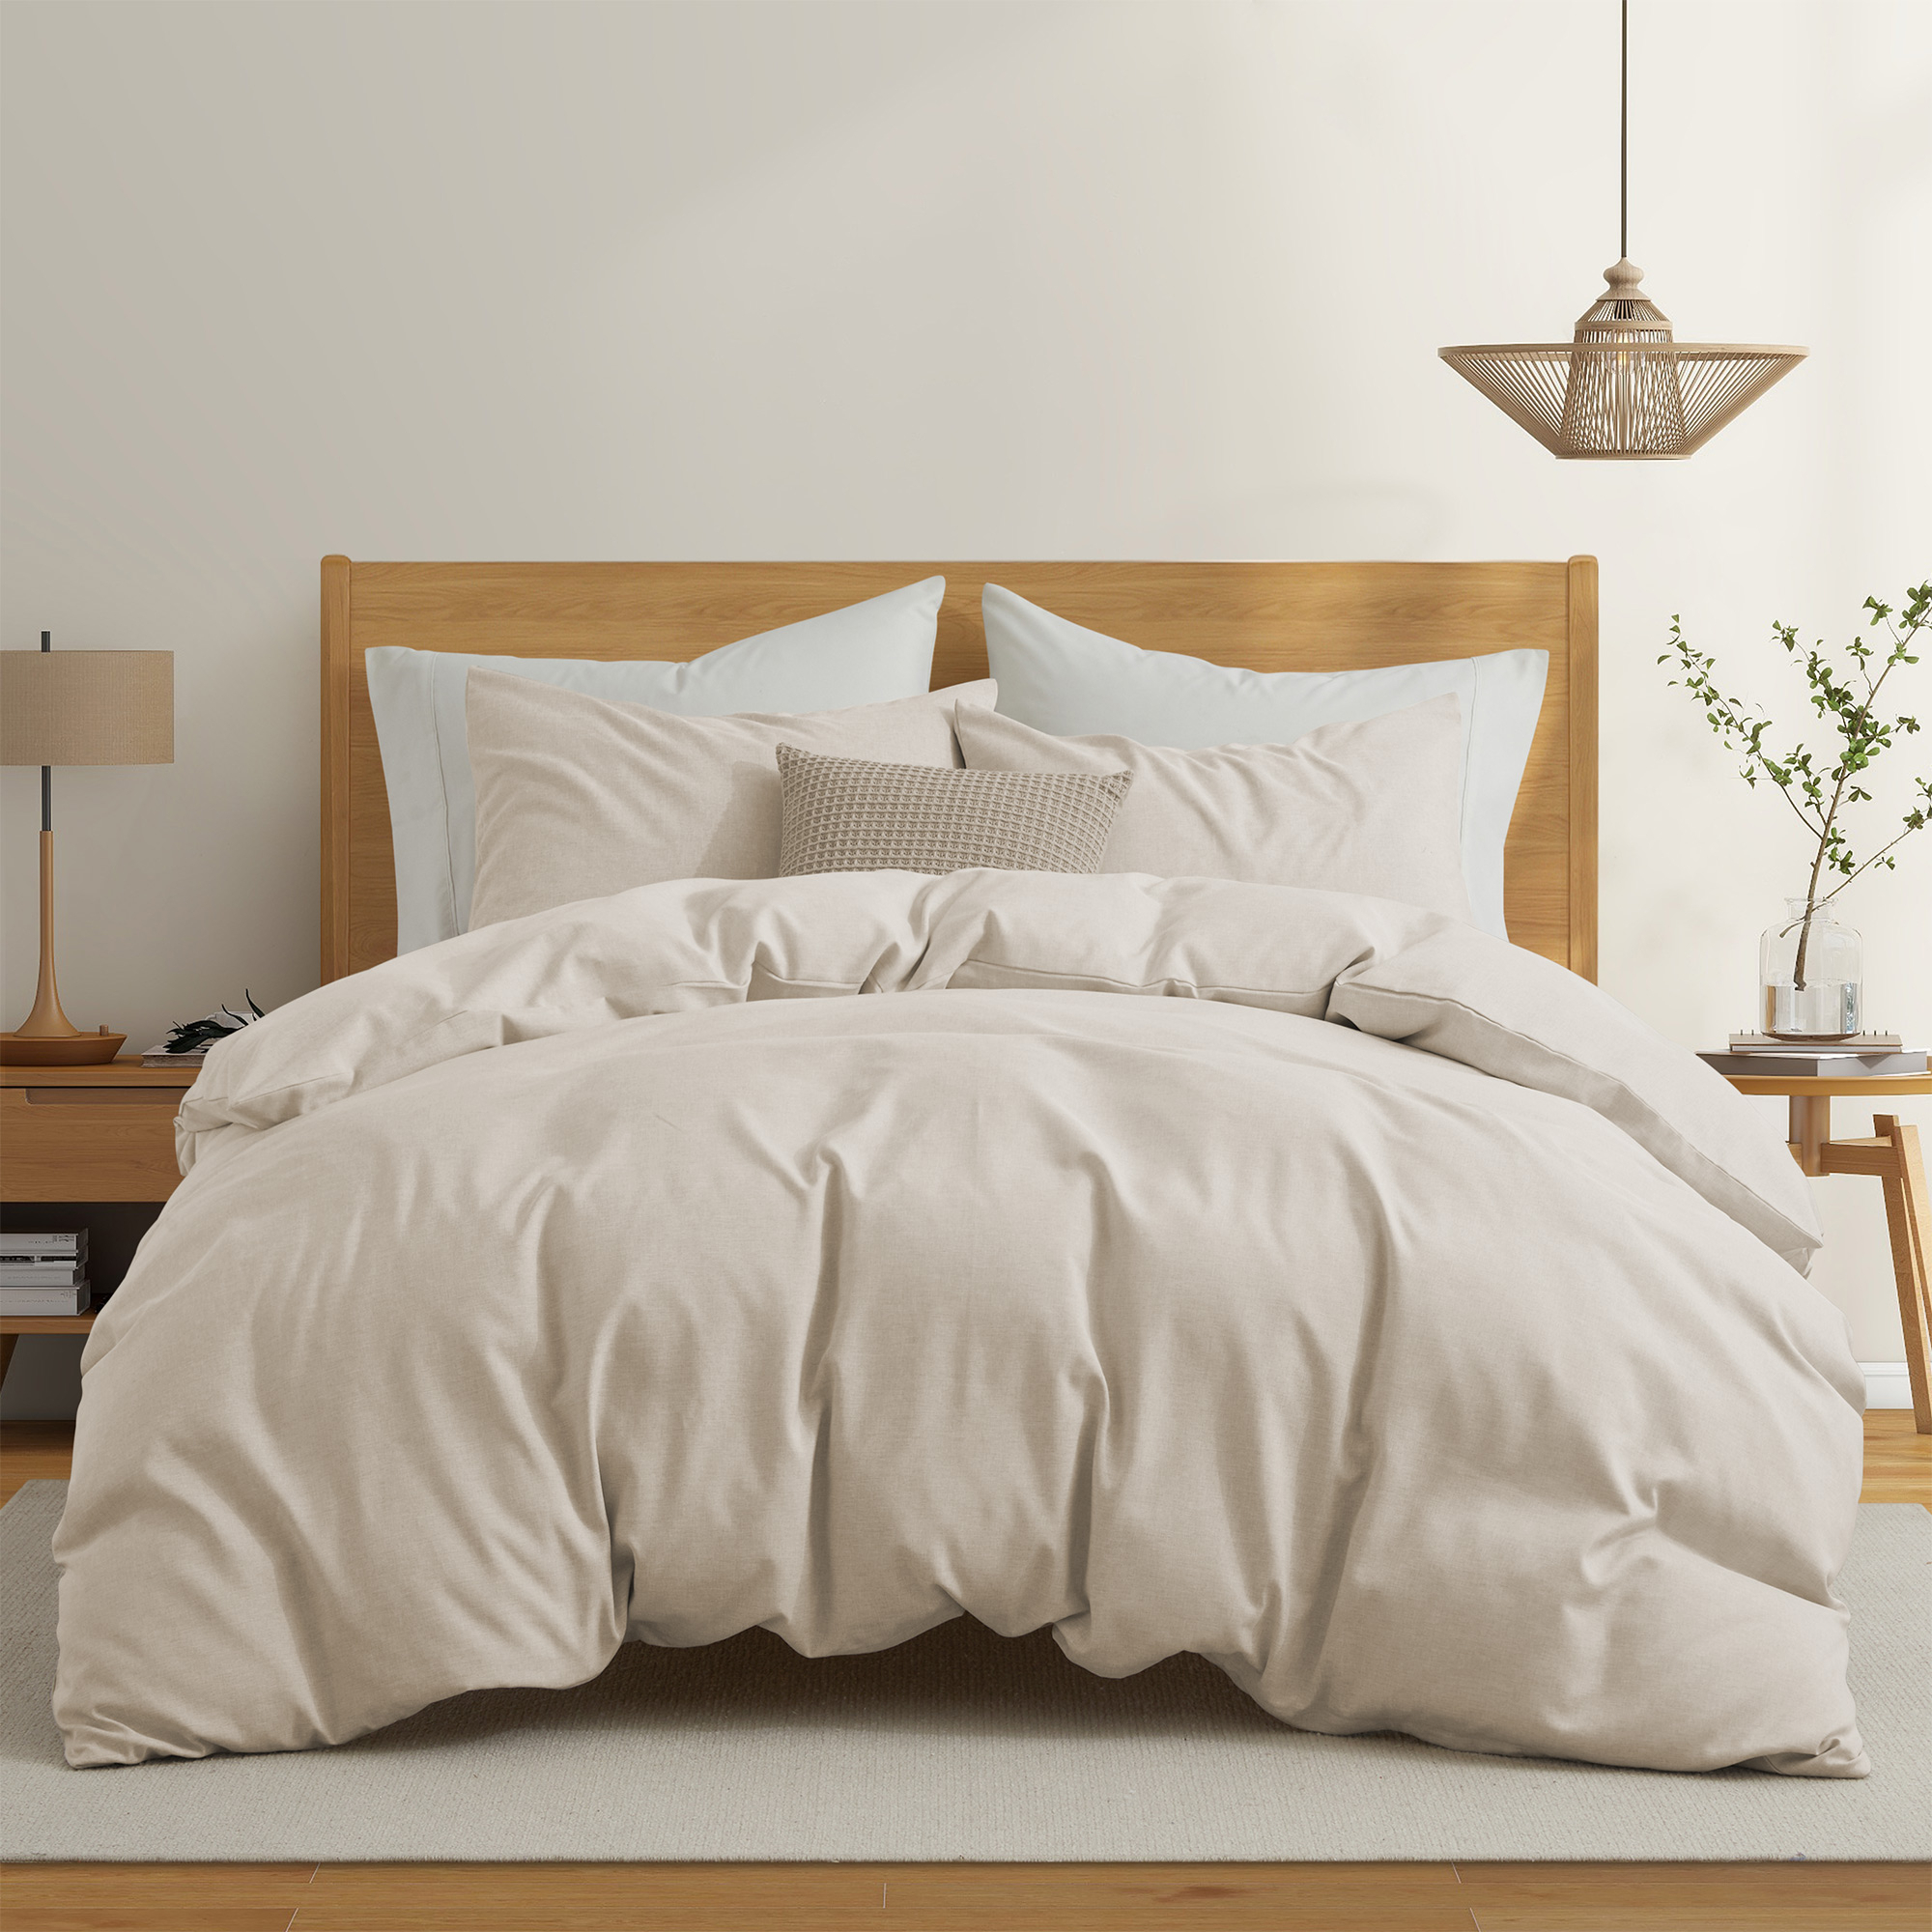 Solid Faux Linen Duvet Cover Set With Shams - Luxurious Comfort - Cream, King-90x106